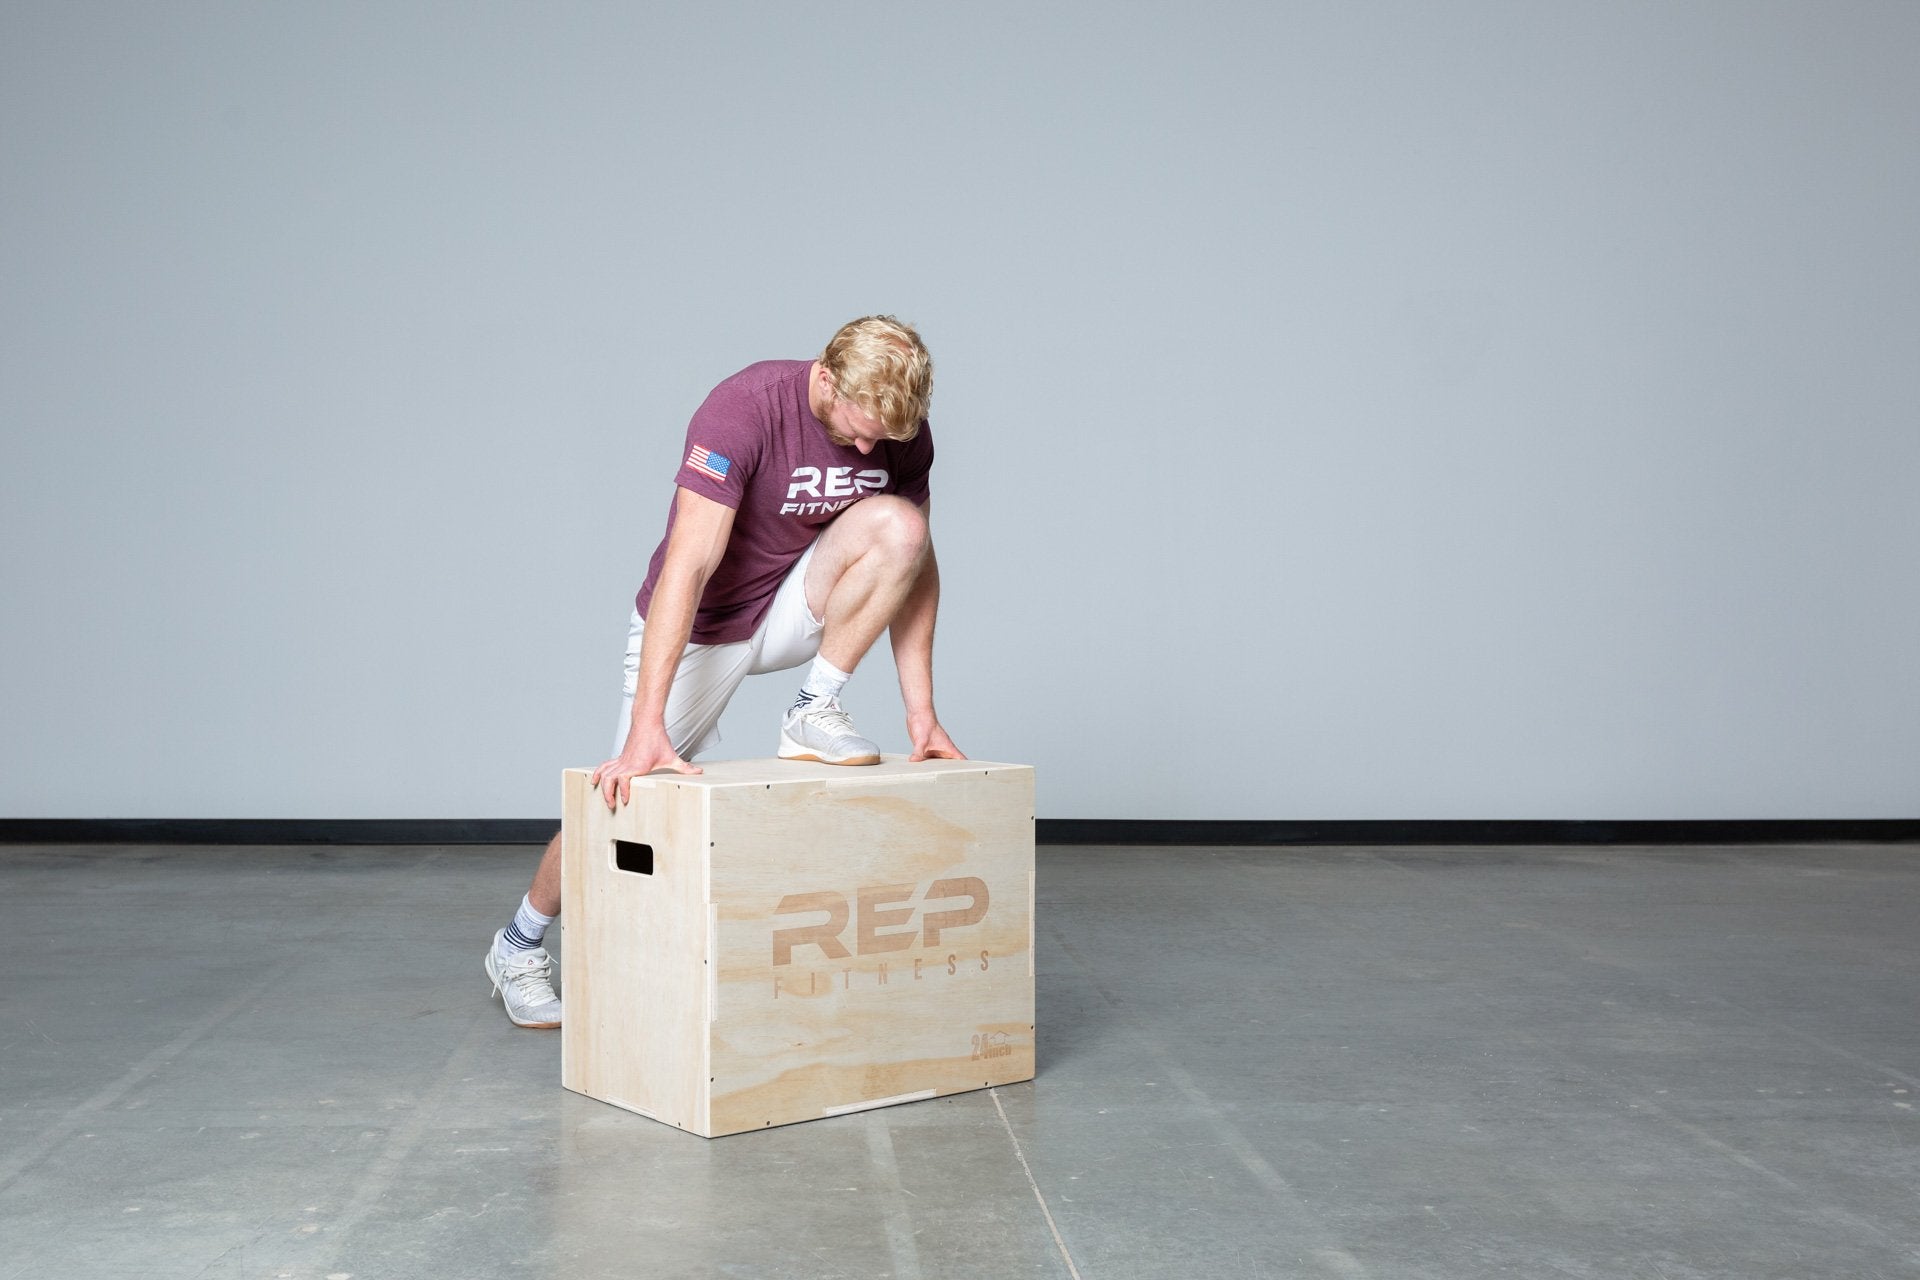 Lifter stretching on a Large REP 3-in-1 Wood Plyo Box.